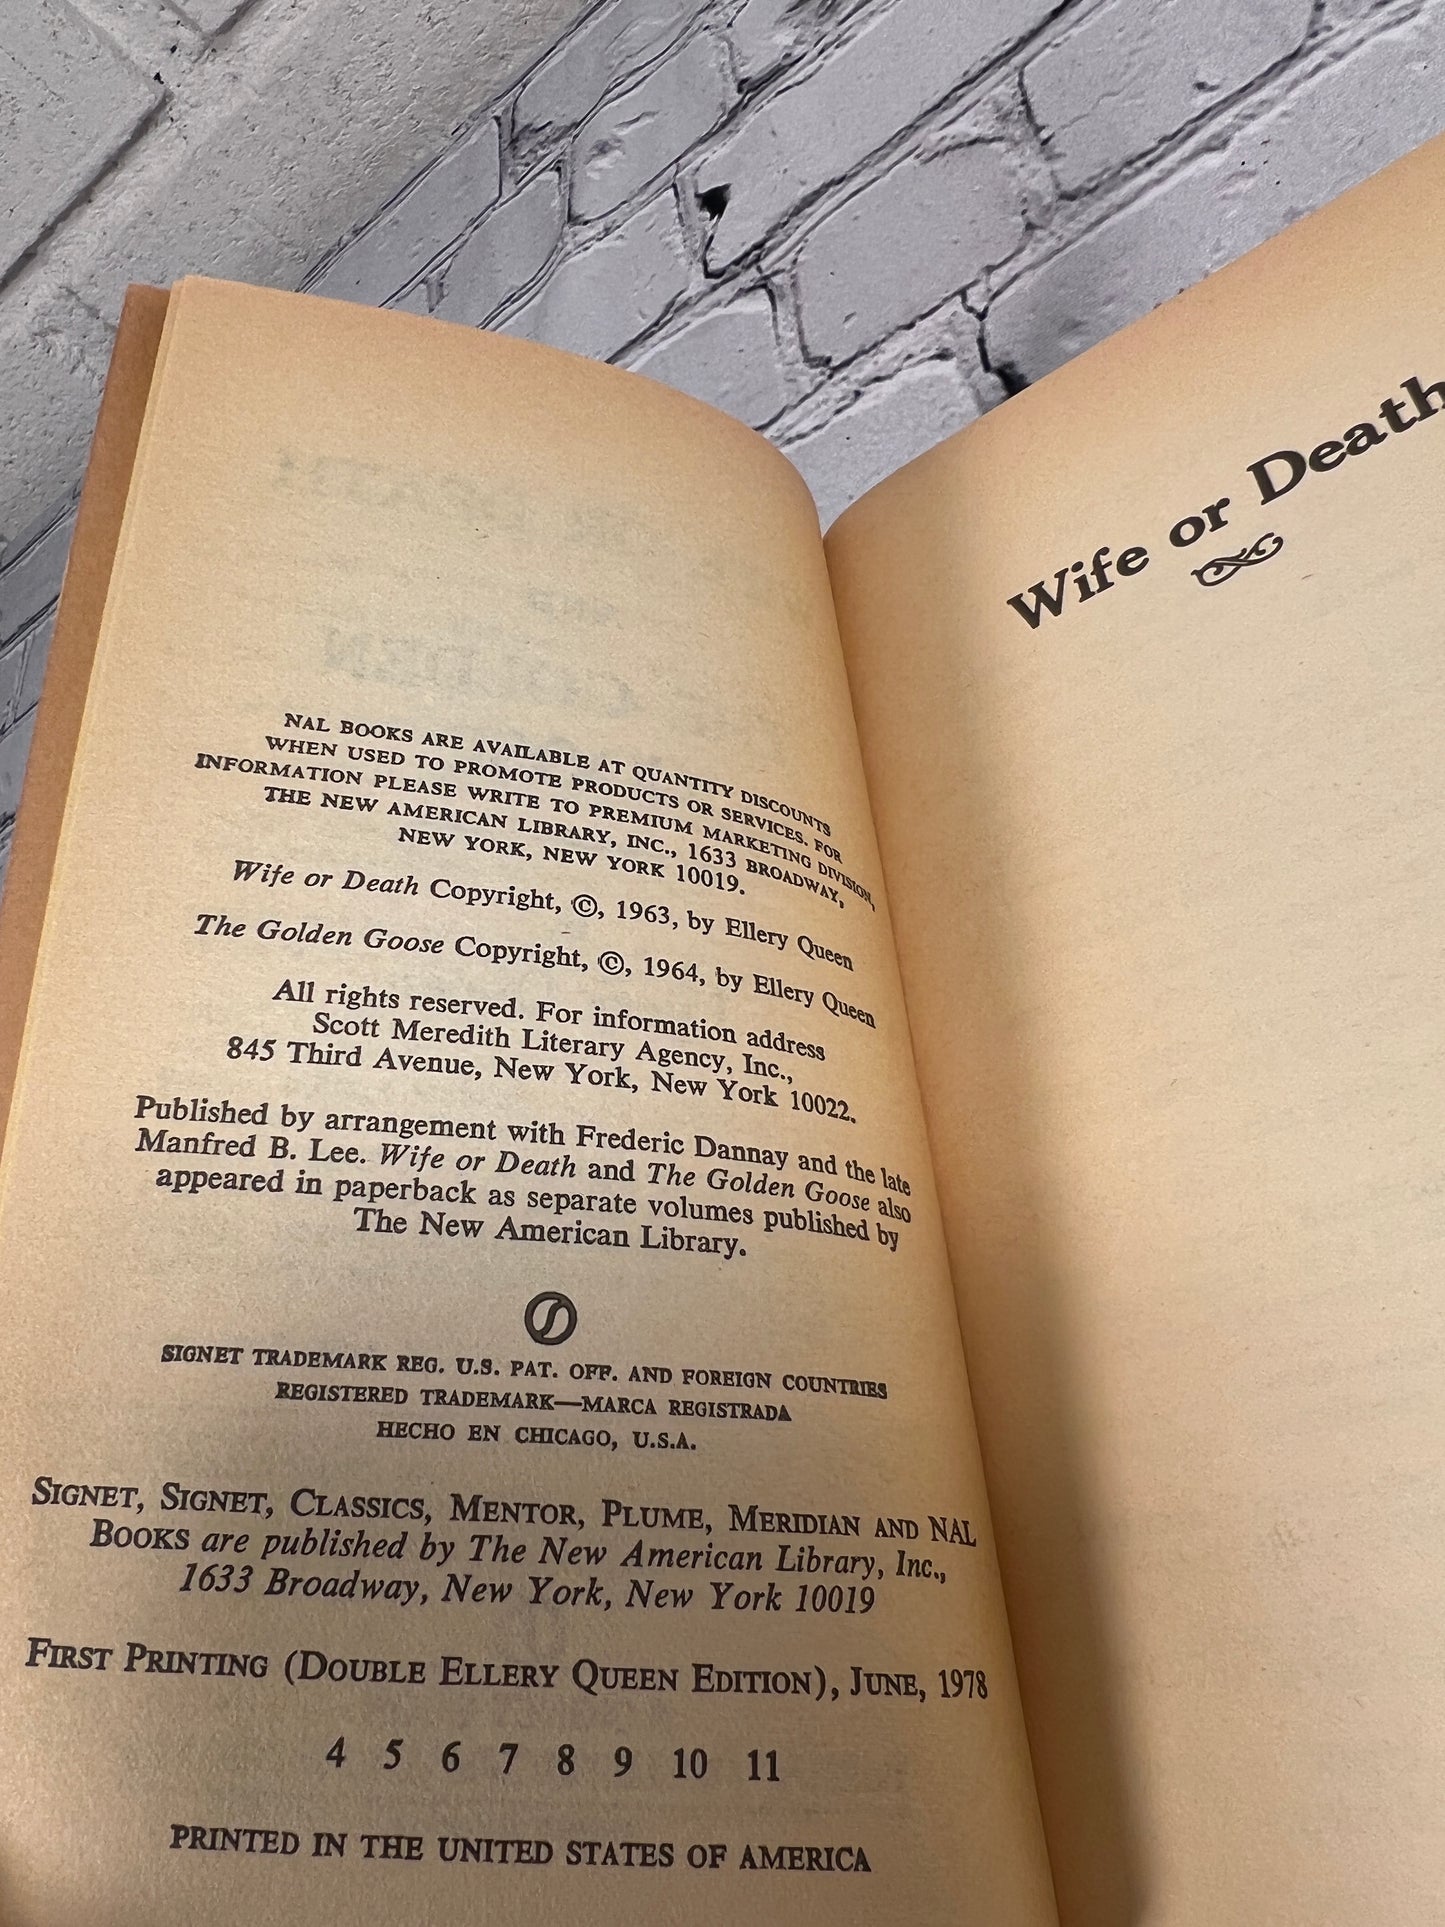 Wife or Death and The Golden Goose by Ellery Queen [1972 · 3rd Printing]